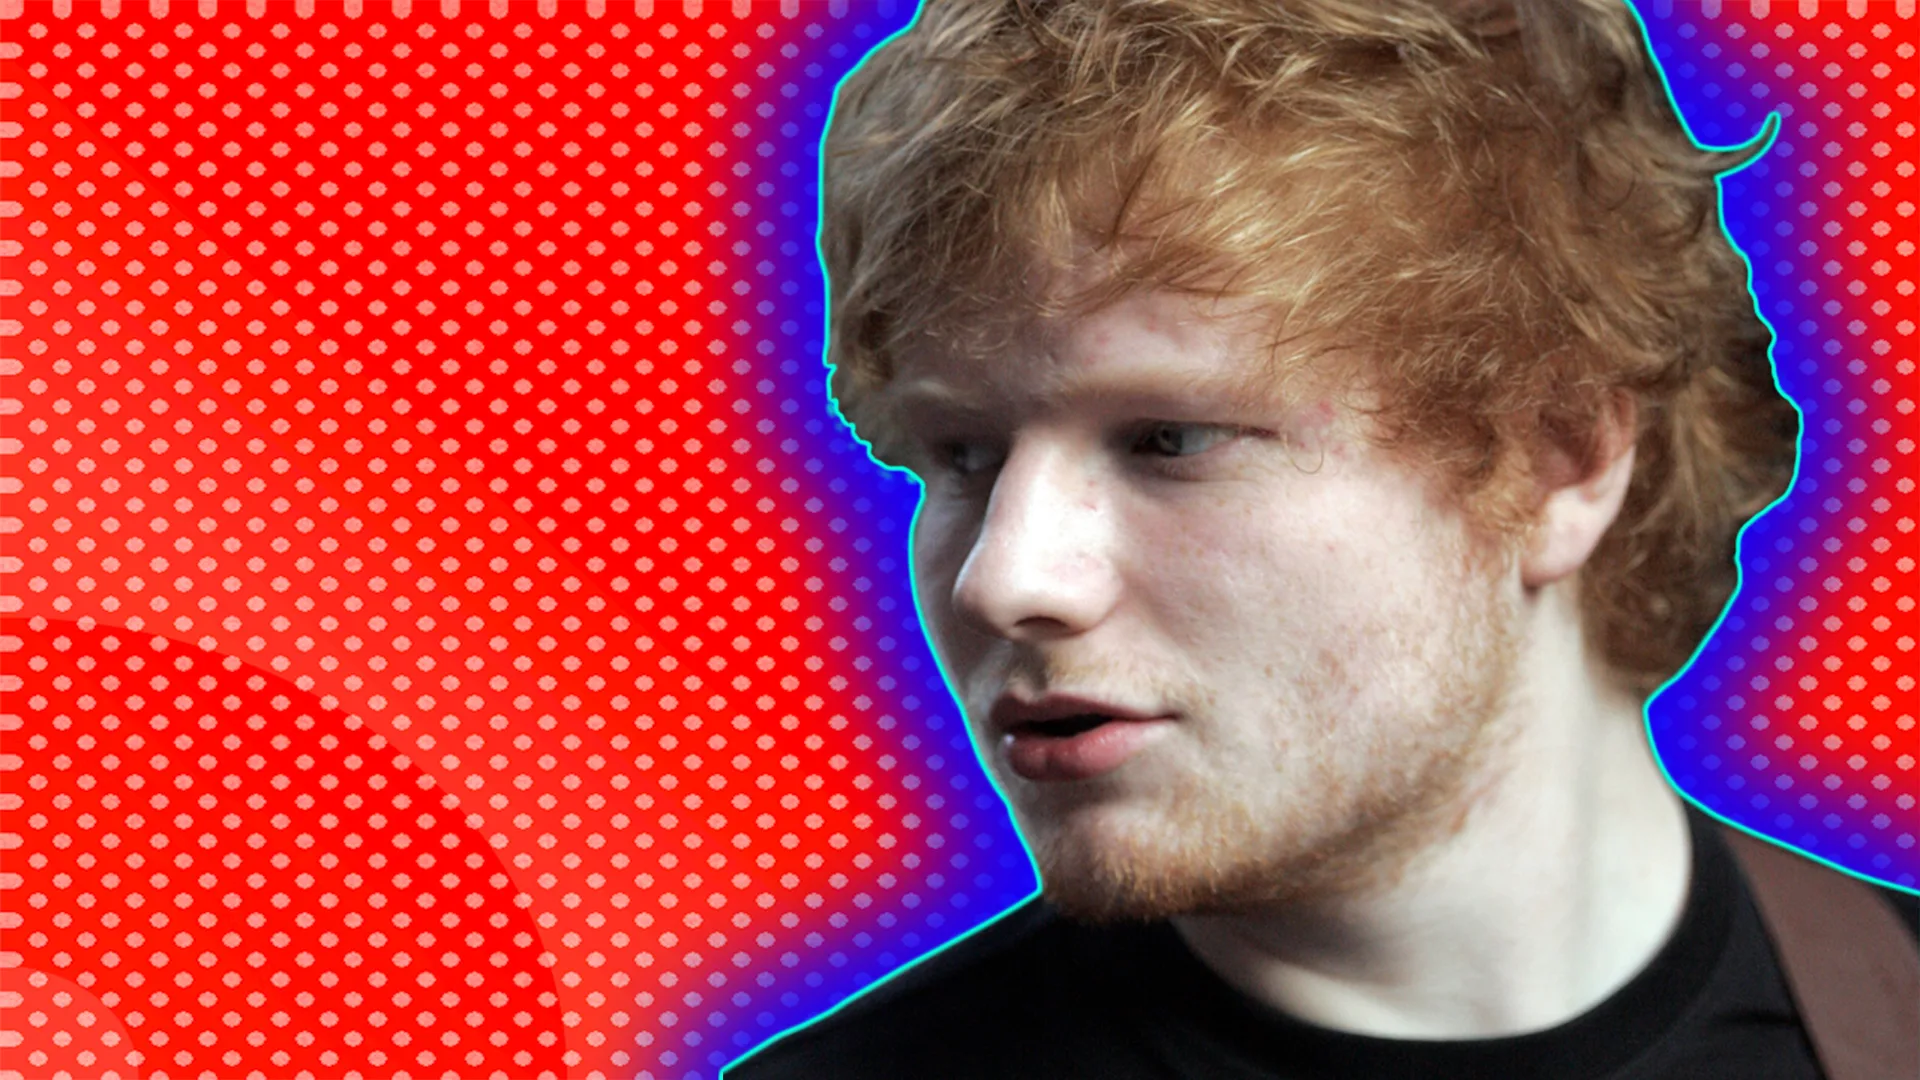 Close up of Ed Sheeran with a textured red background outlined by a blue and turquoise halo effect